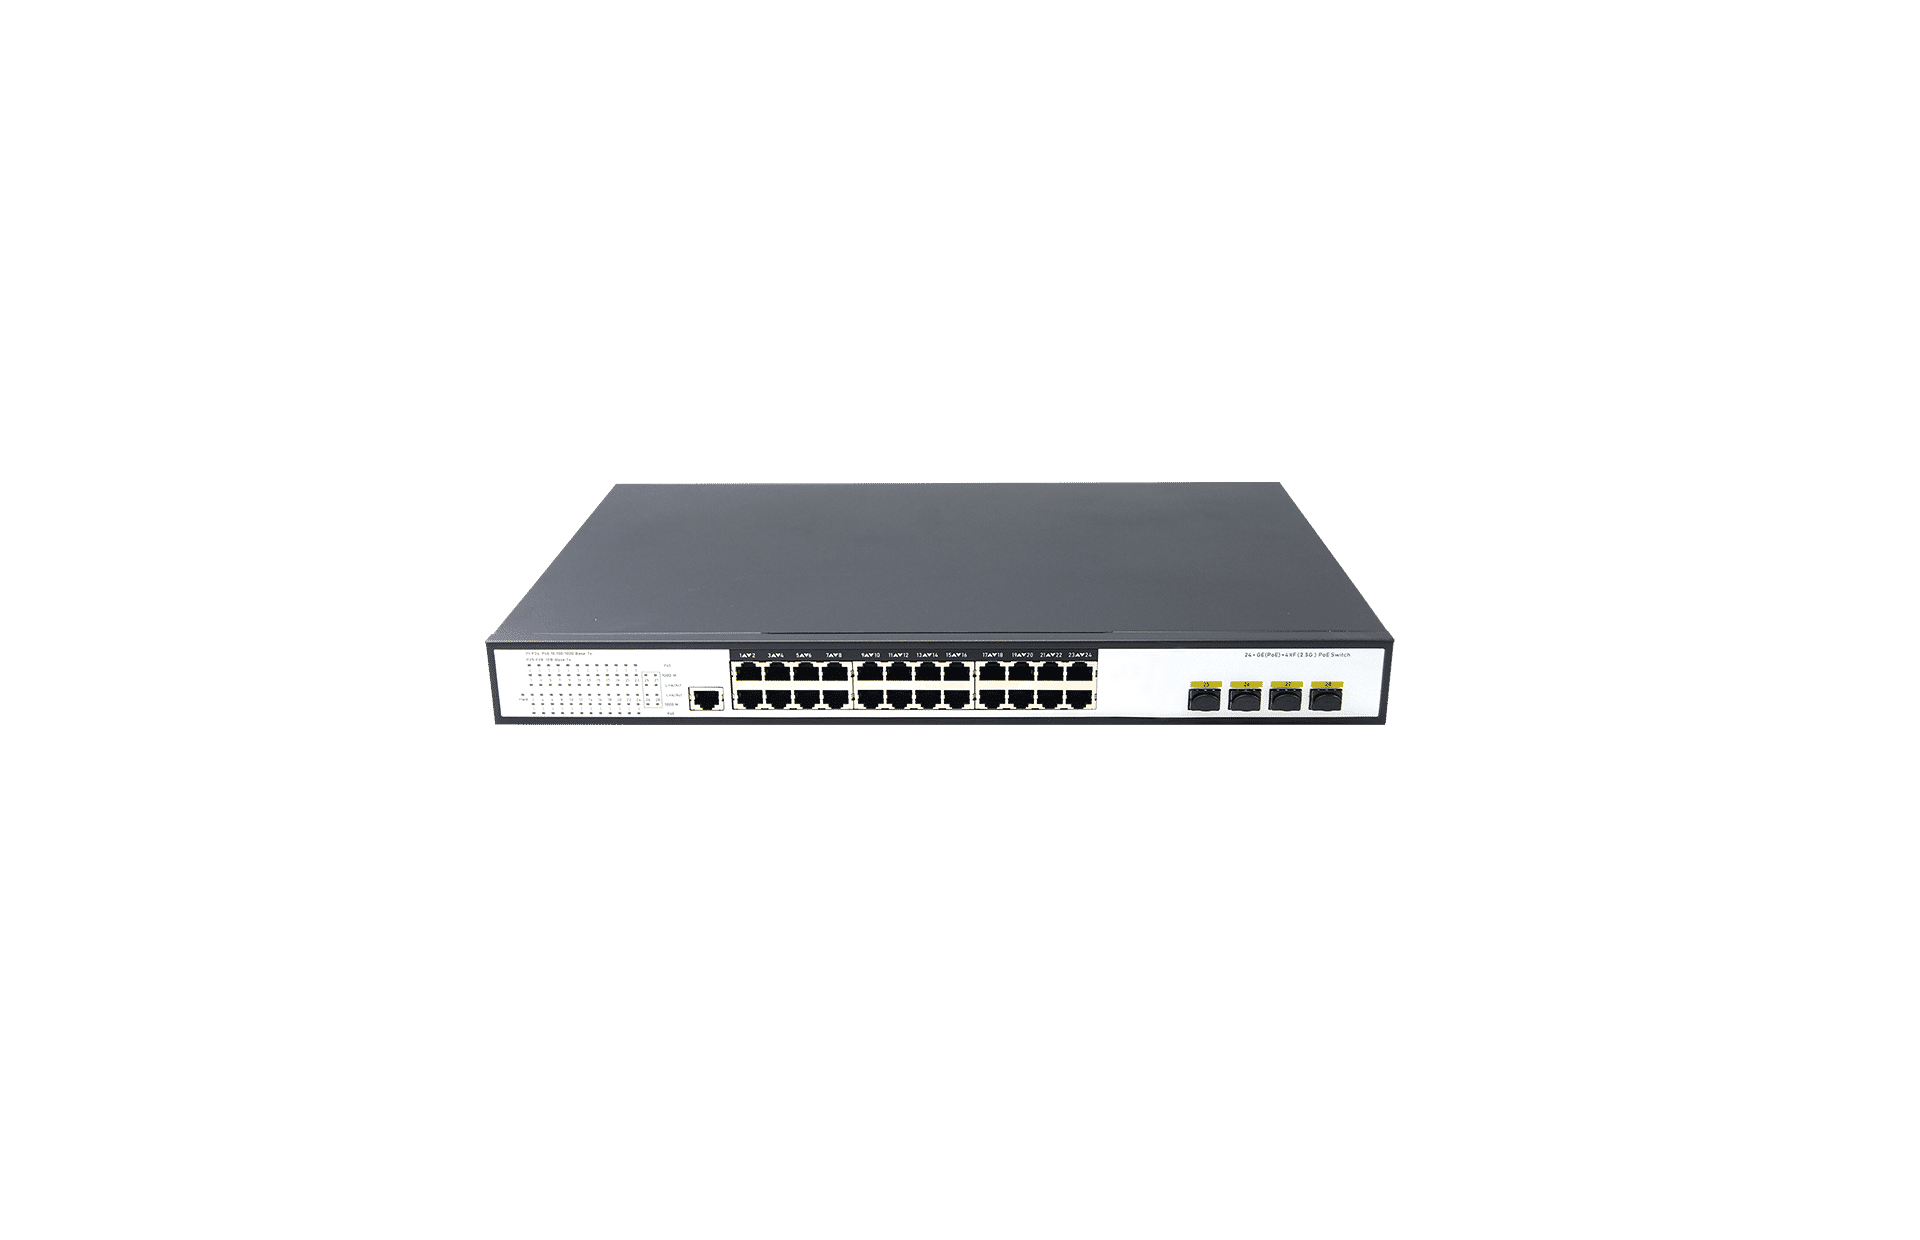 24 Ports 10/100/1000Mbps Managed PoE Switch with 4 Ports 2.5G SFP+